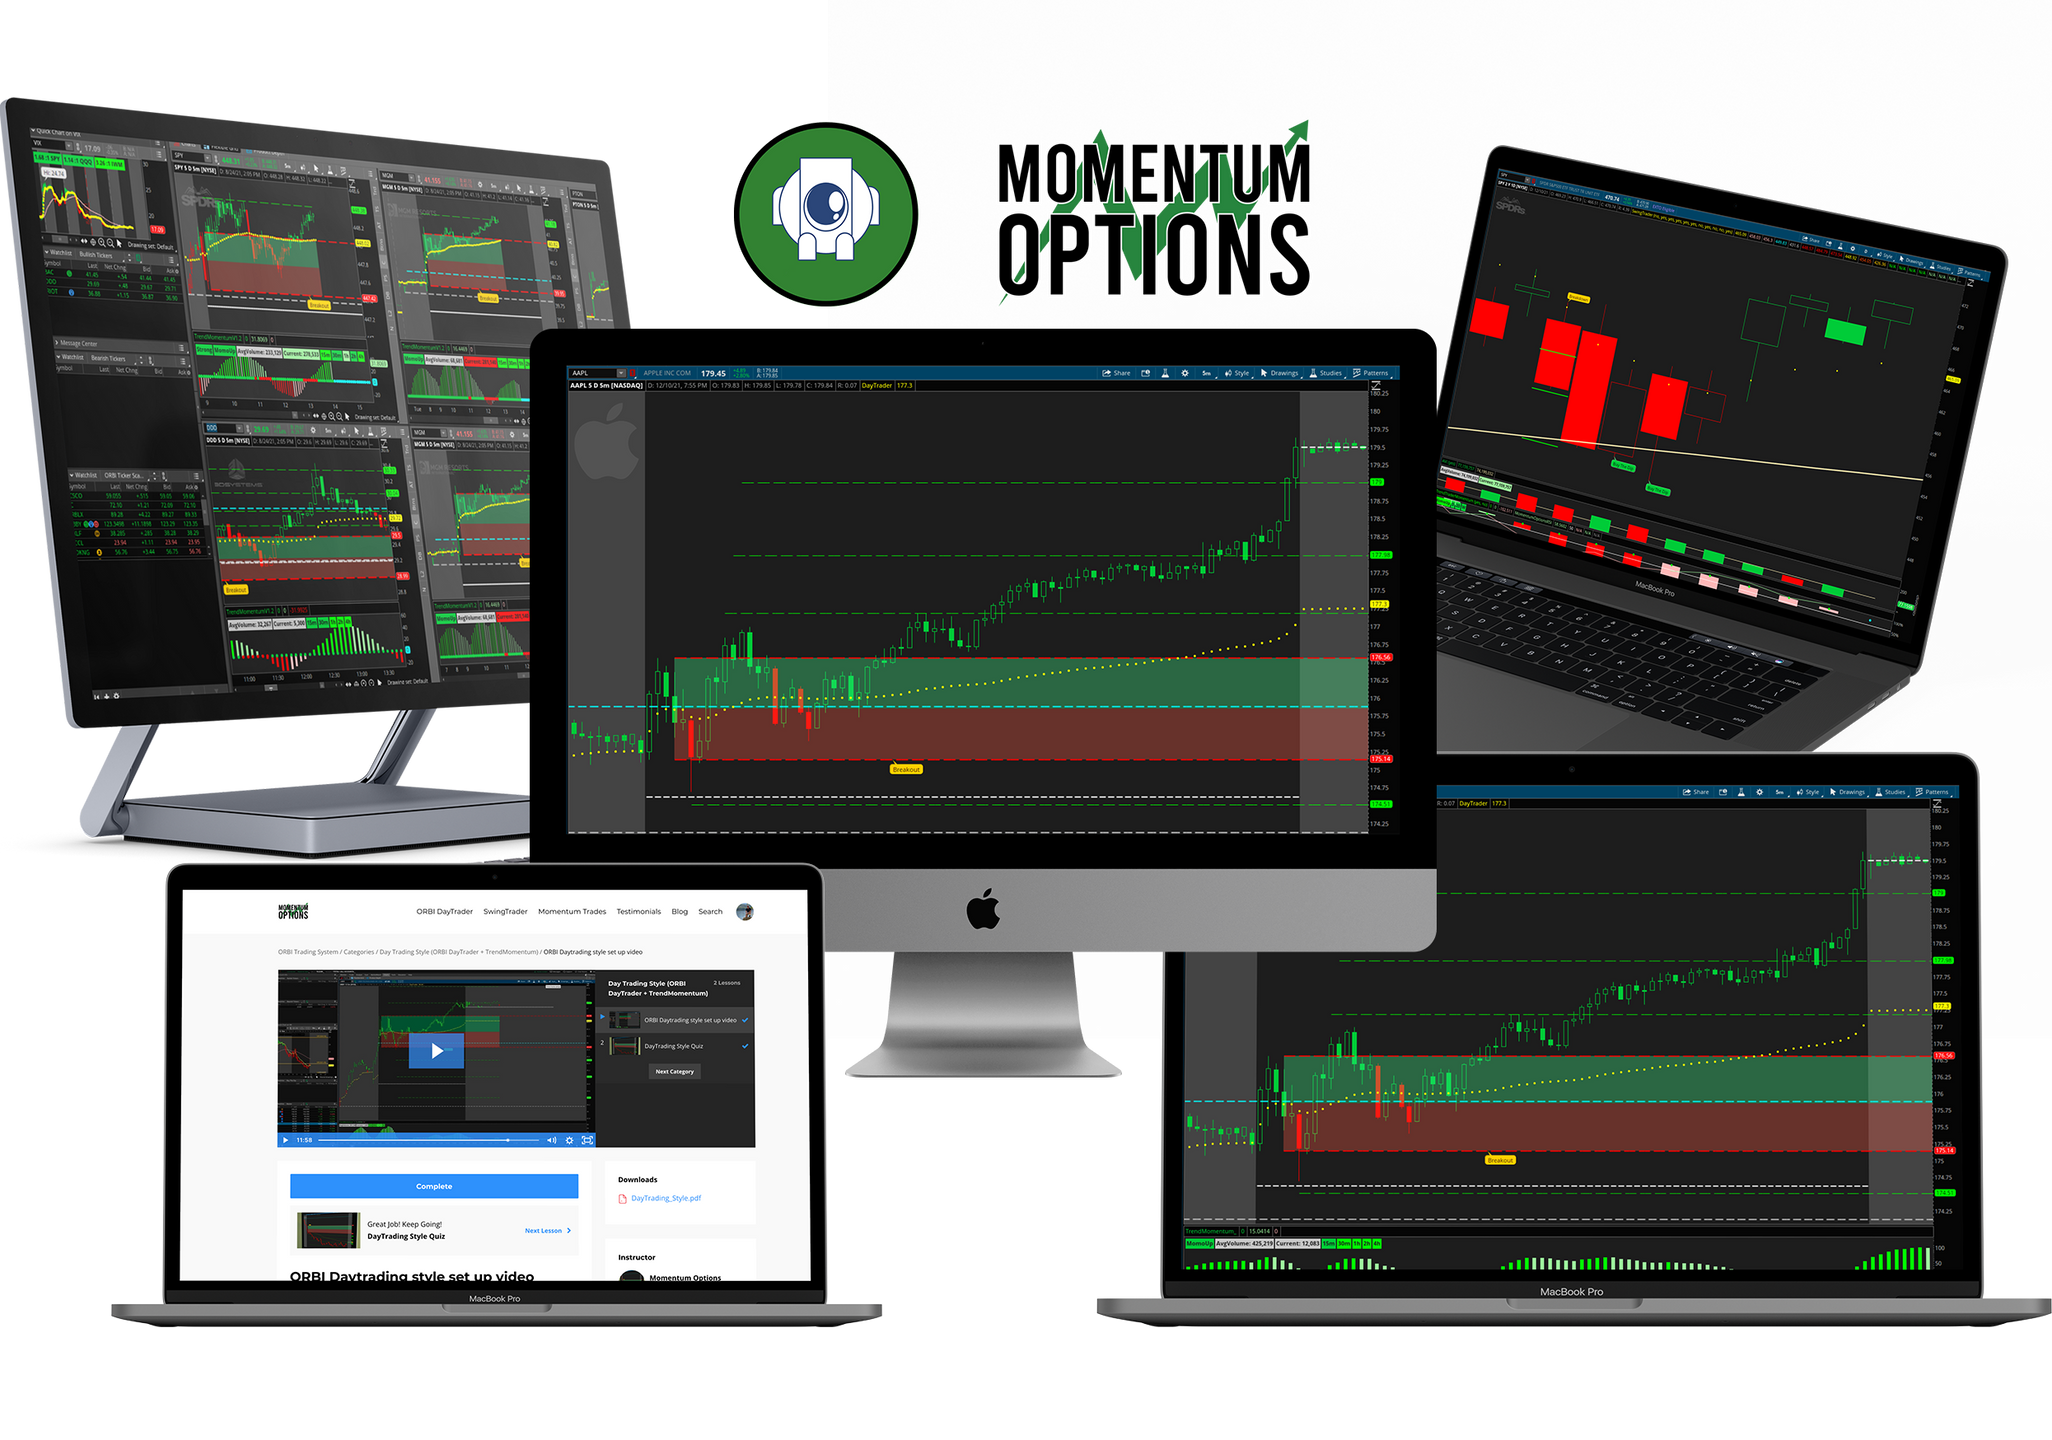 Momentum Options Trading Course By Eric Jellerson